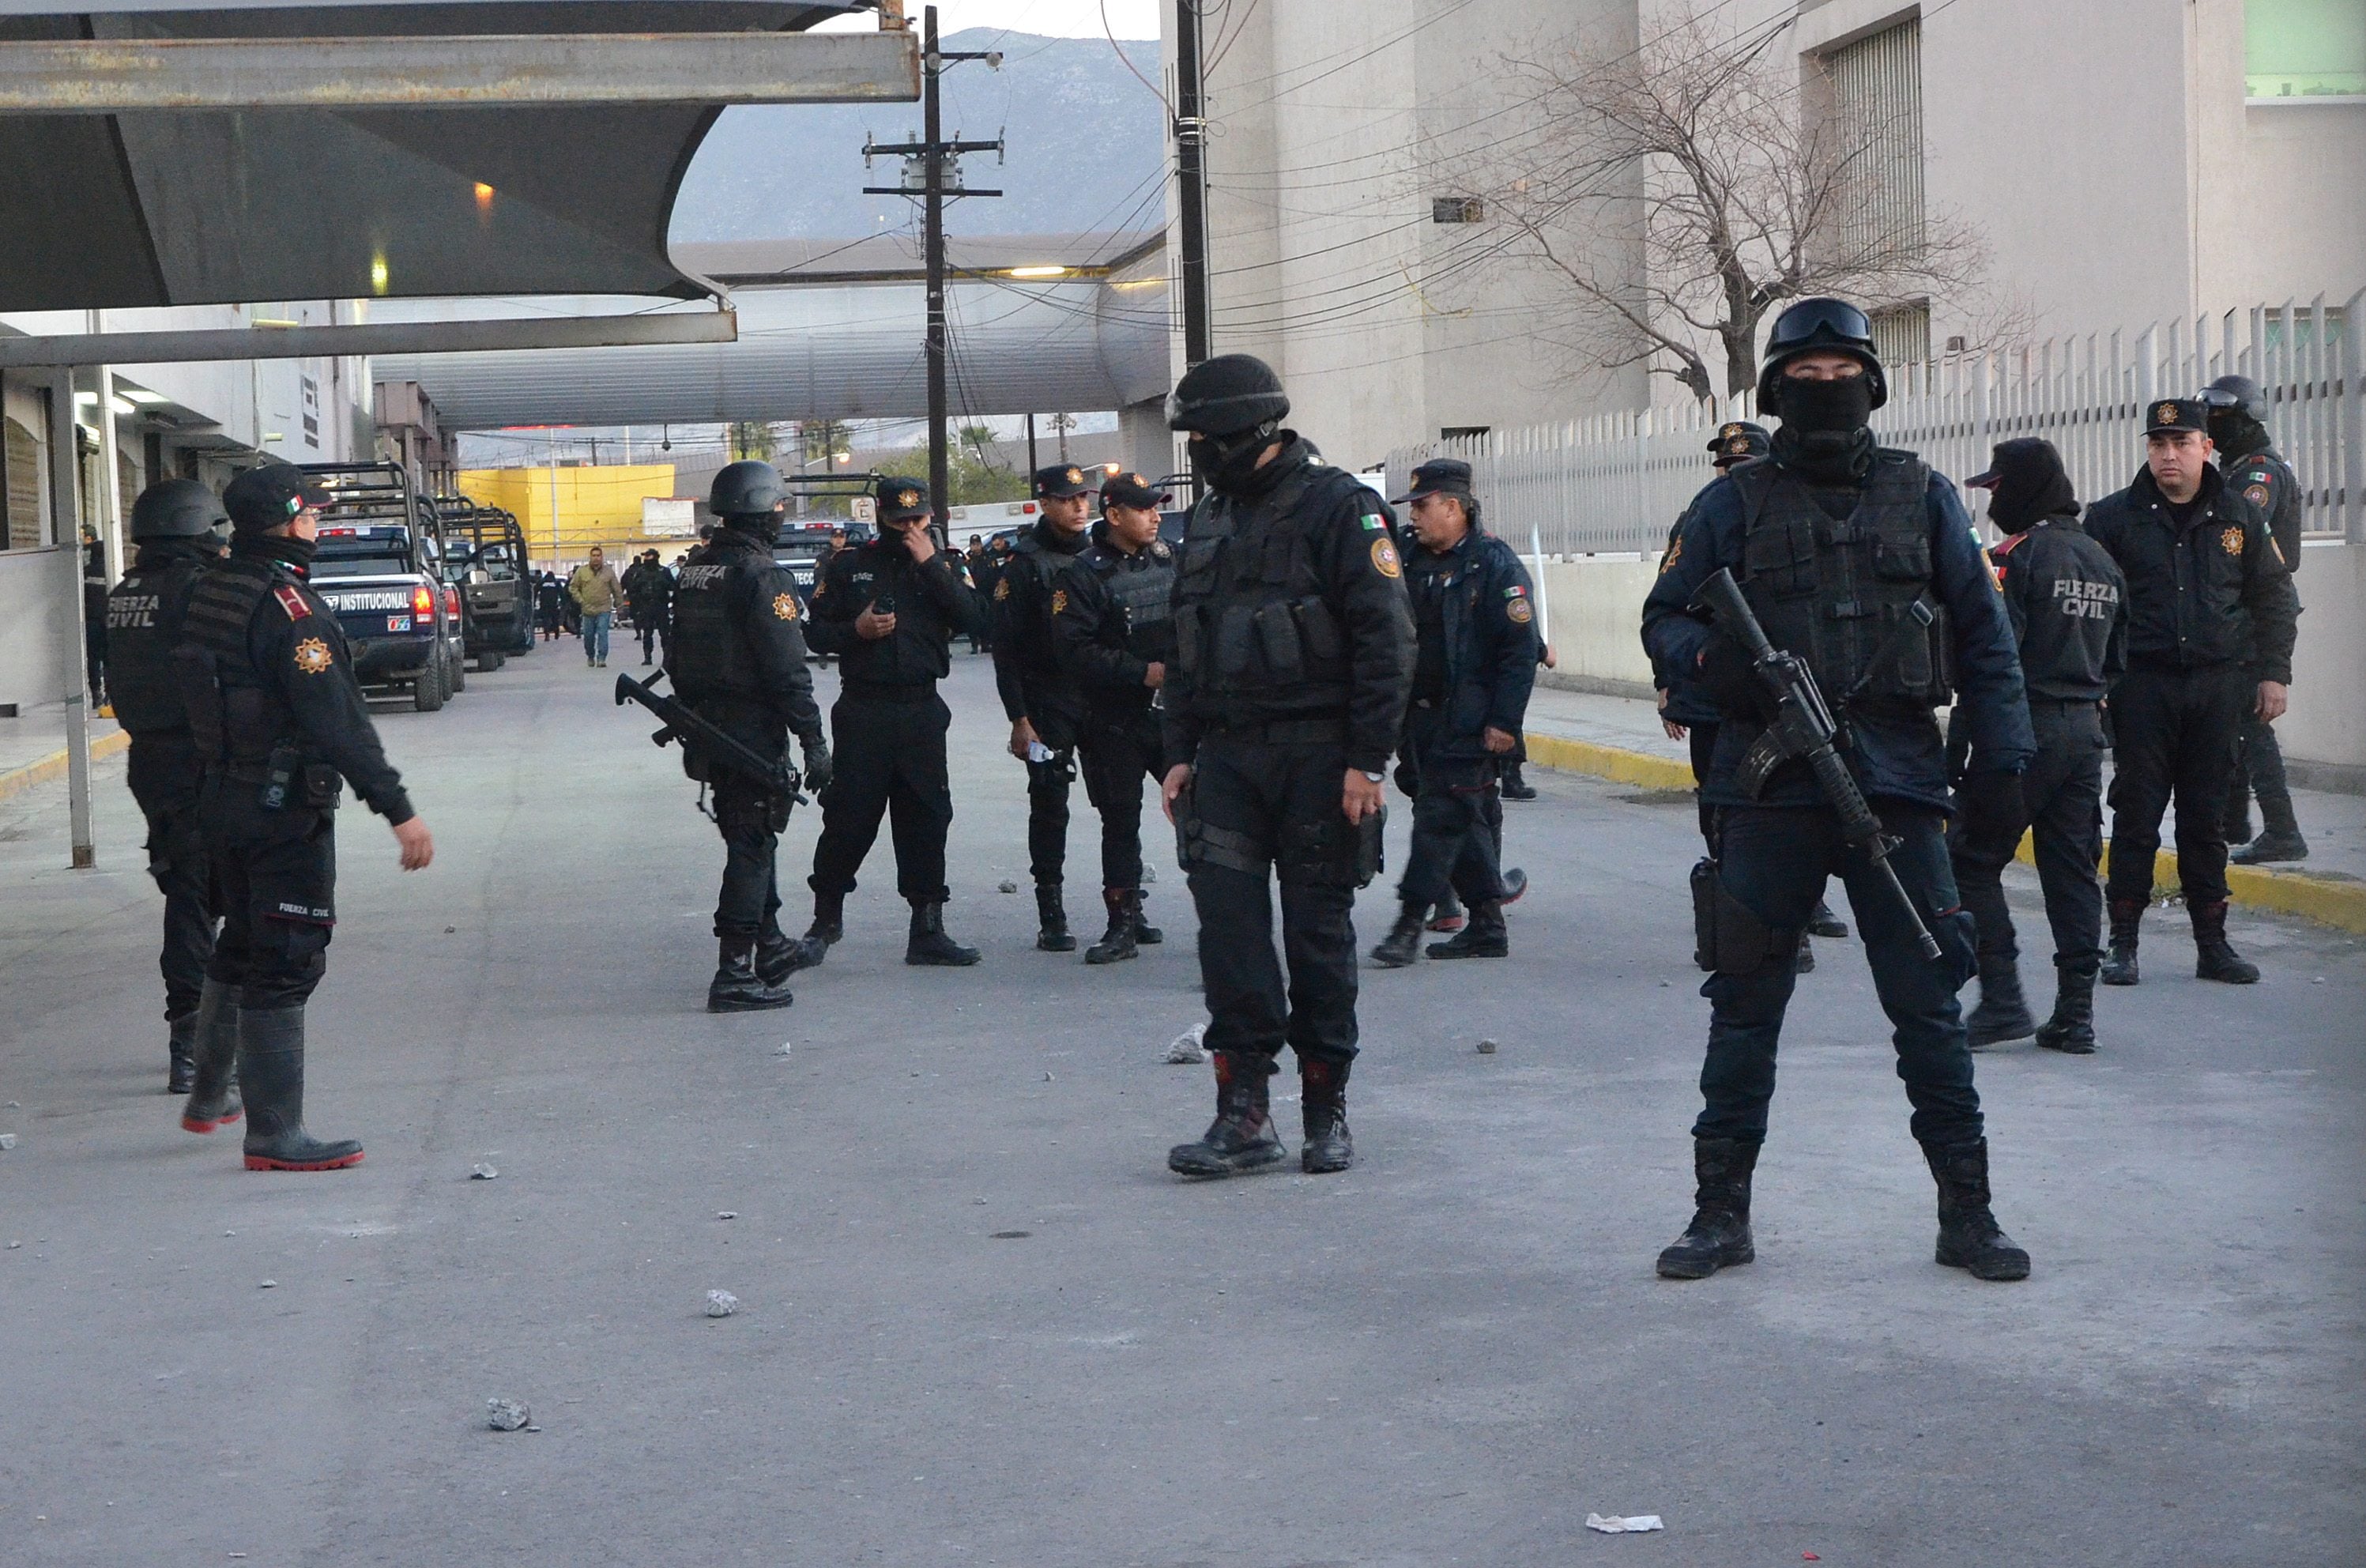 Police stand guard at the entrance of the Topo Chico prison, where a riot broke out just around midnight, in Monterrey, Mexico, on Thursday. Dozens of inmates were killed and several injured in a brutal fight between two rival factions at the prison in northern Mexico, the state governor said.